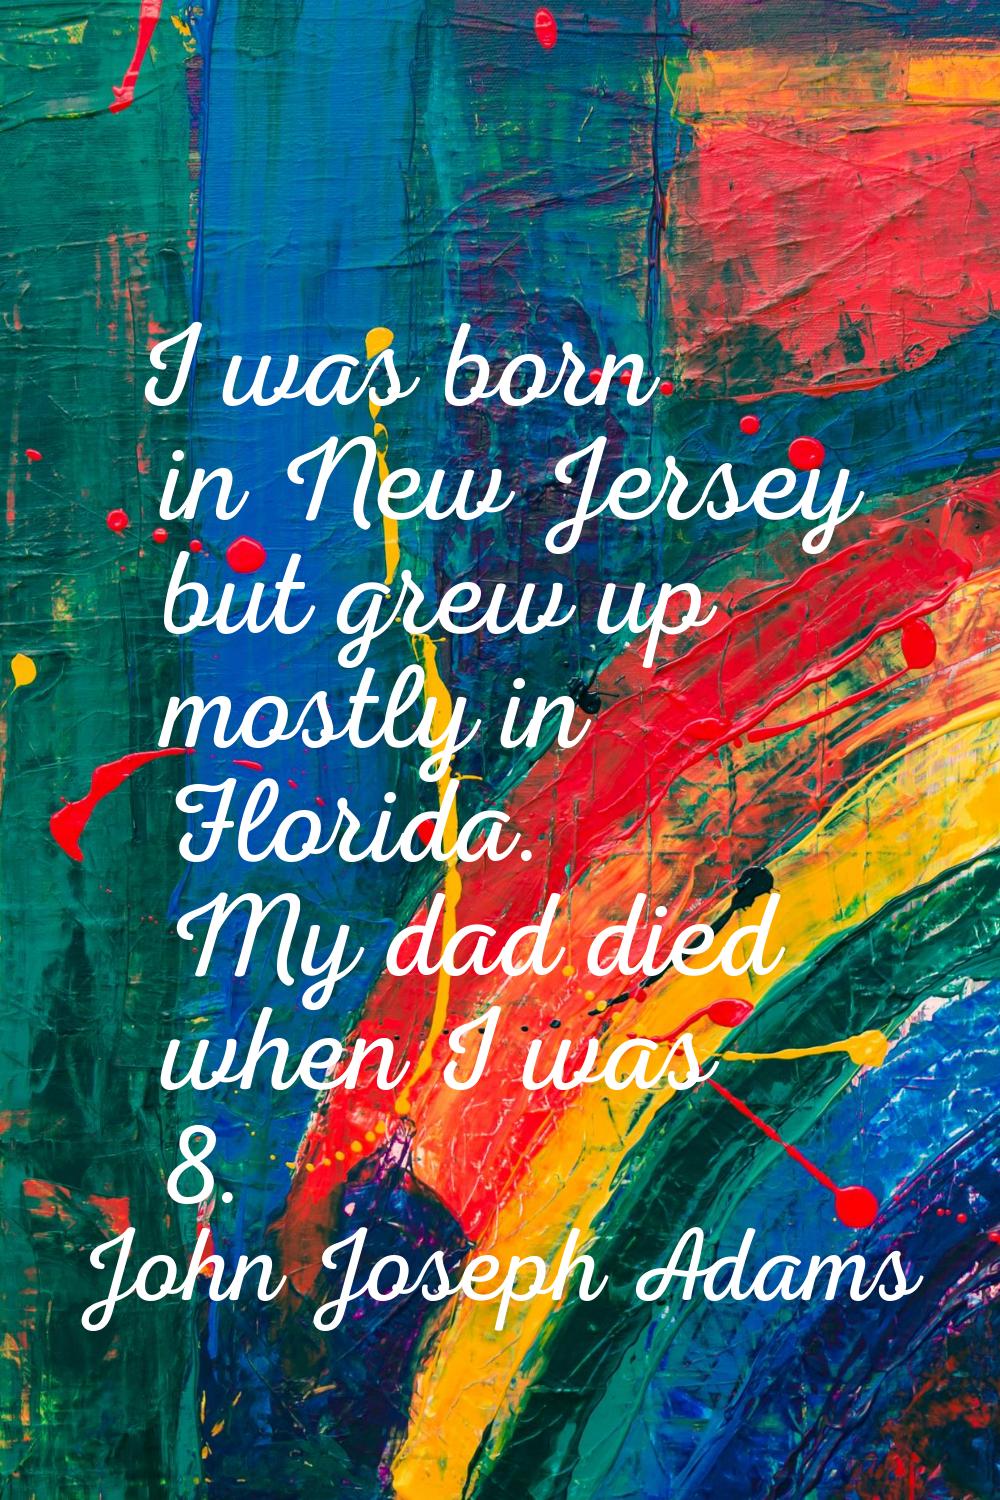 I was born in New Jersey but grew up mostly in Florida. My dad died when I was 8.